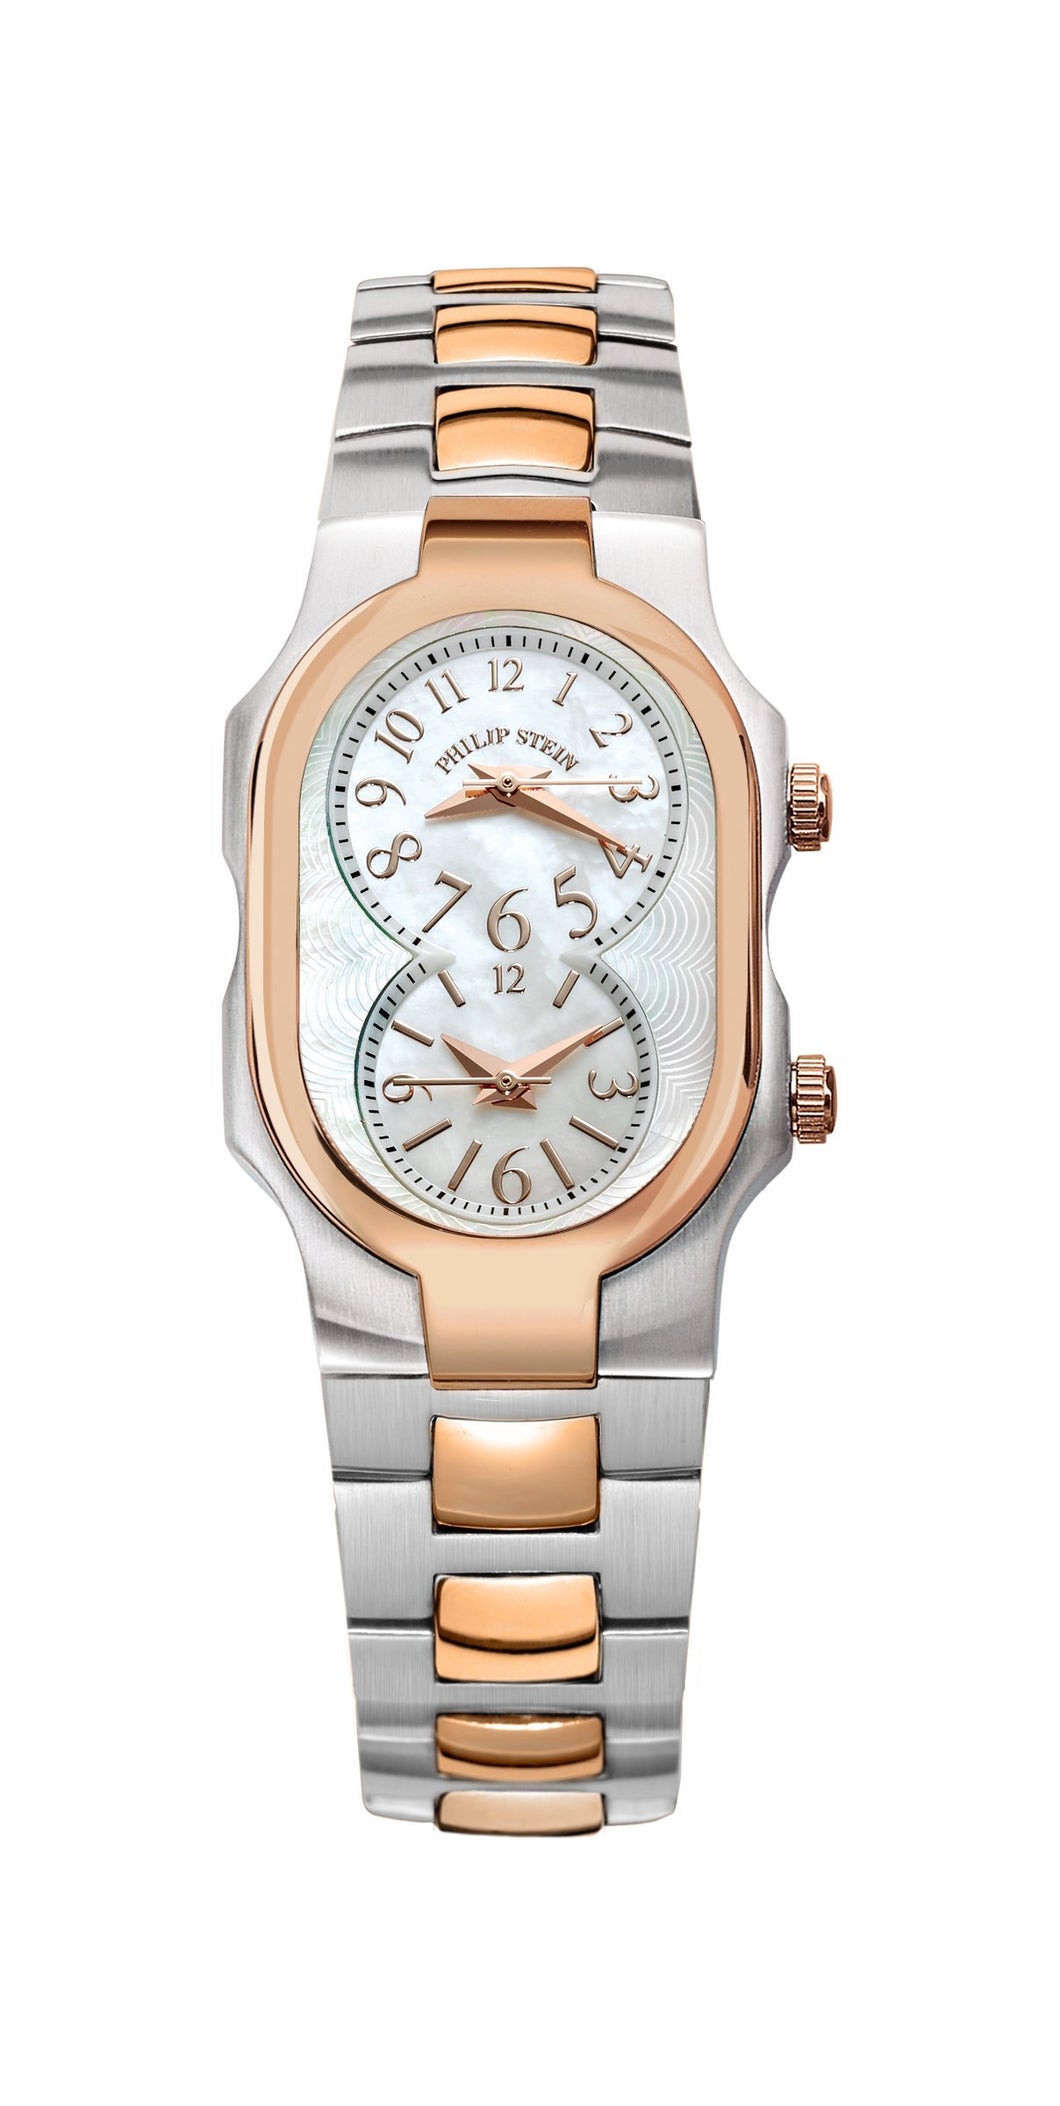 Small Signature Dual Time Zone Two Tone Rose Gold Watch with Bracelet